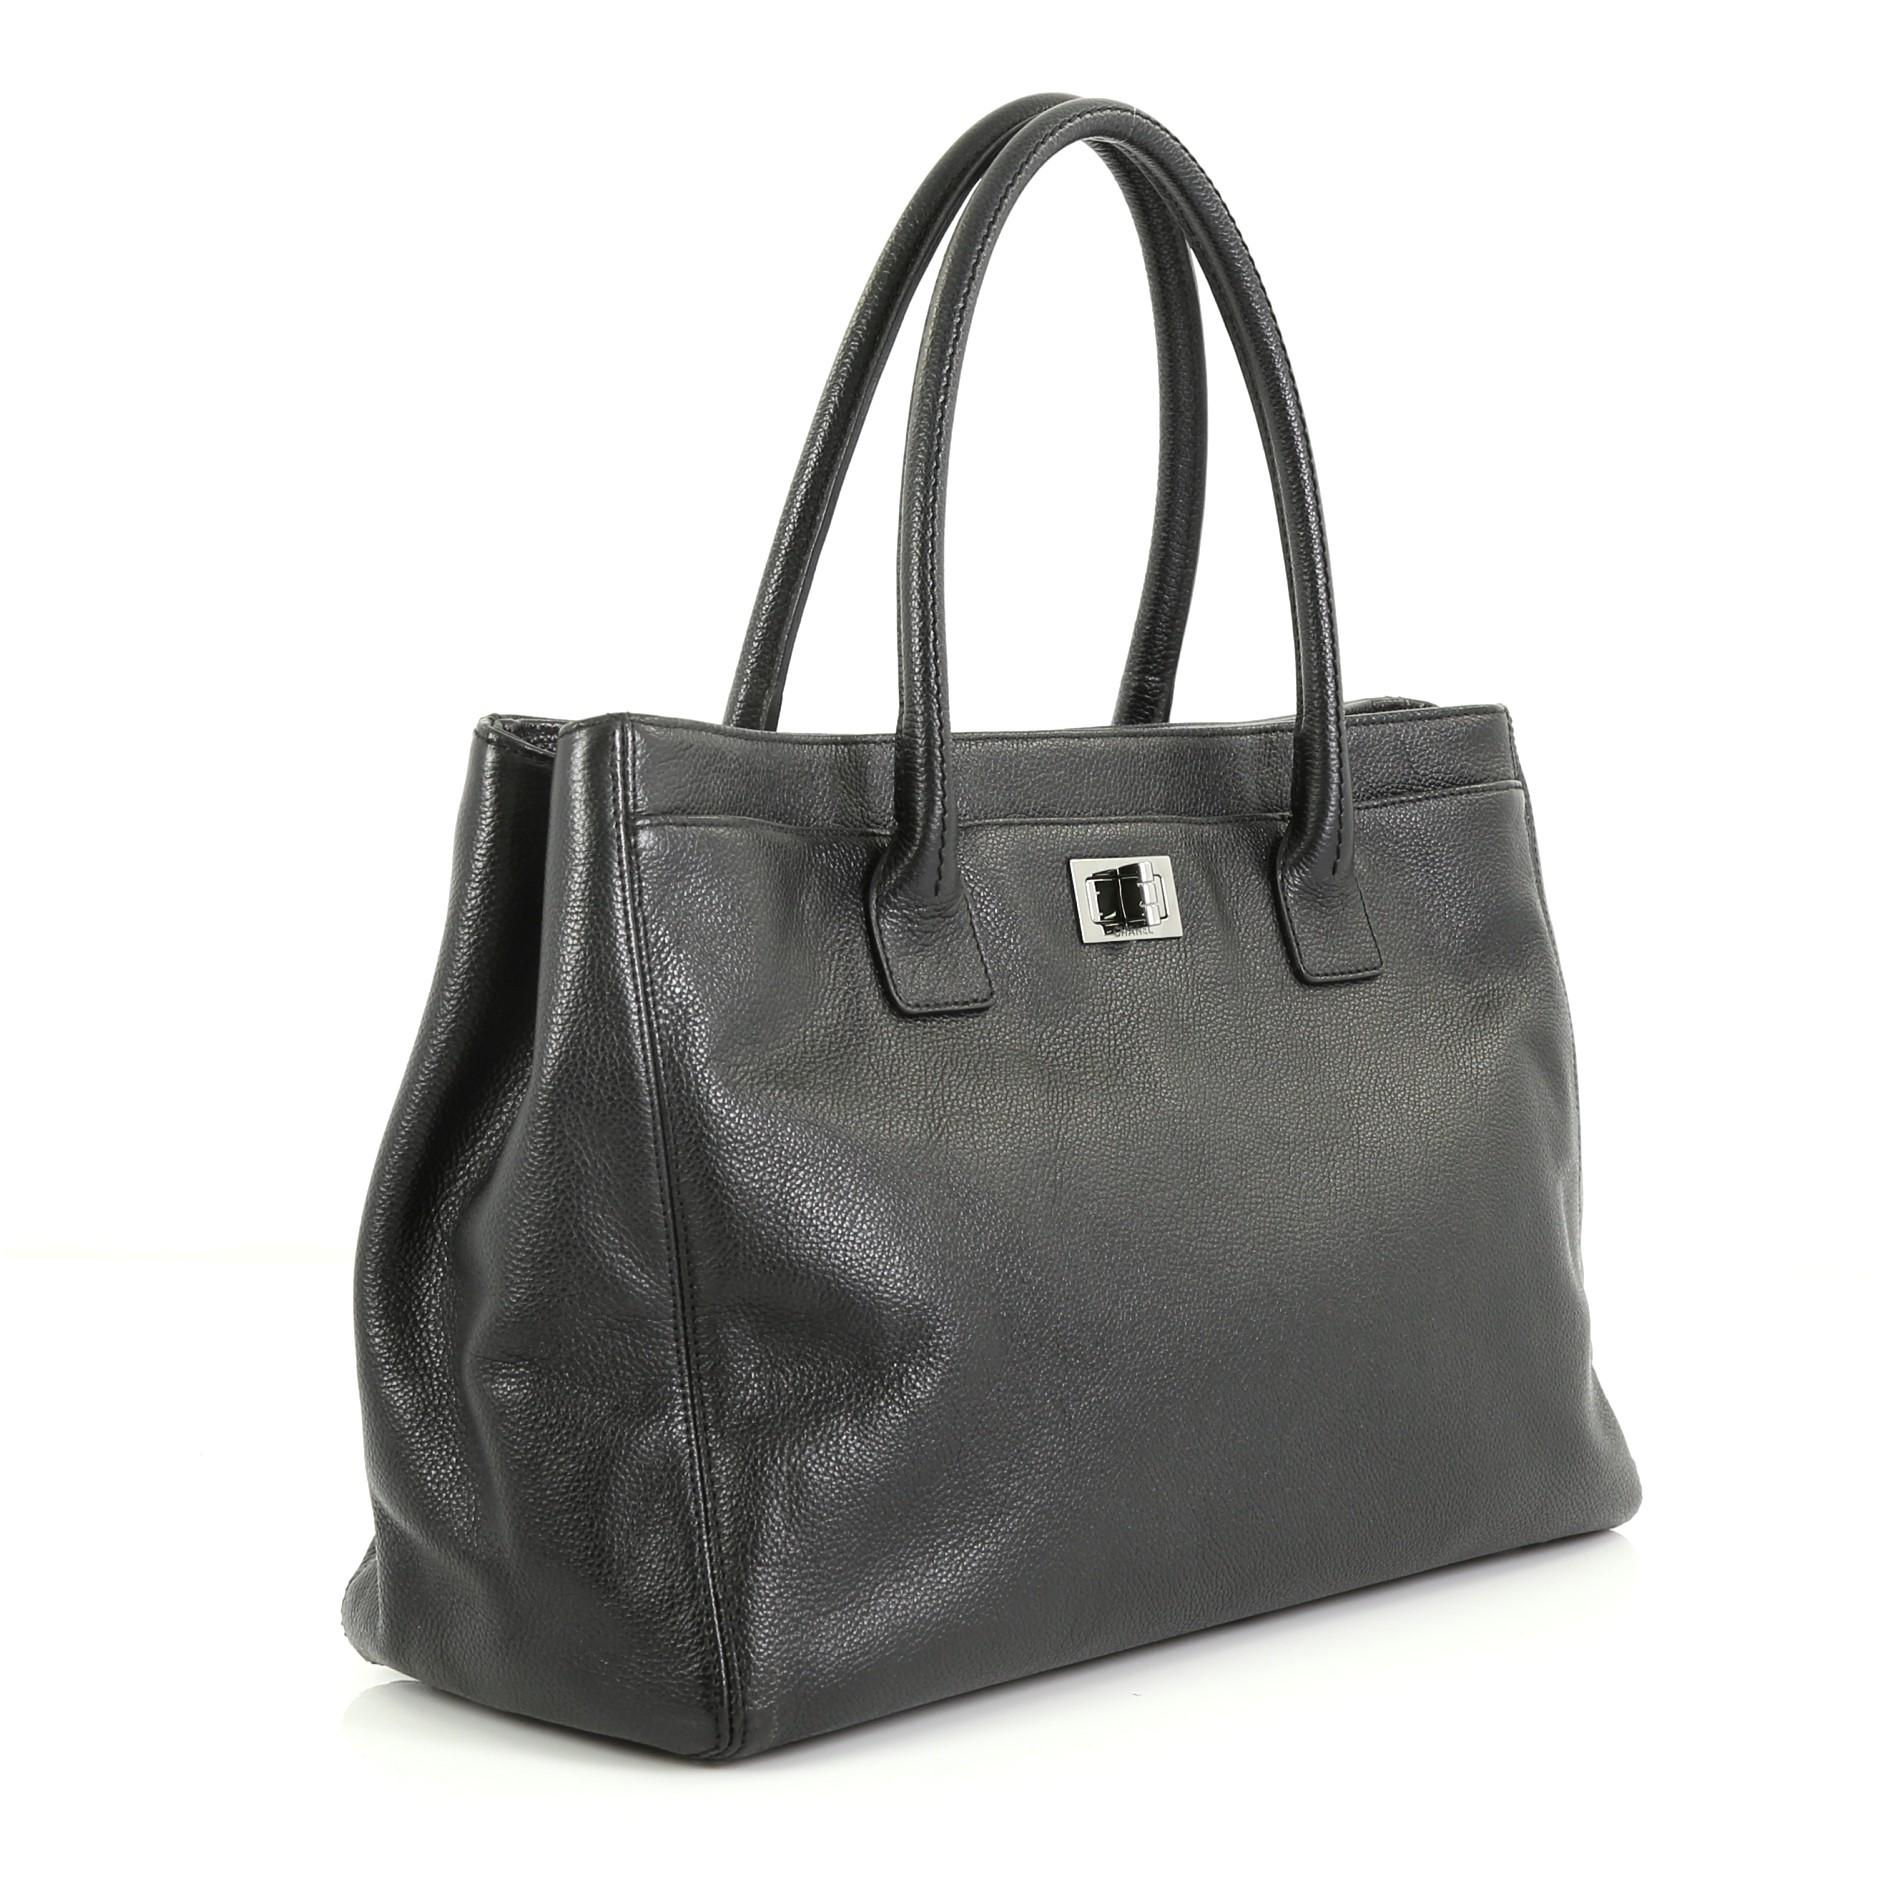 This Chanel Reissue Cerf Executive Tote Leather Medium, crafted in black leather, features dual rolled leather handles, front pocket with mademoiselle turn-lock closure, exterior back pocket, and silver-tone hardware. Its magnetic snap closures open